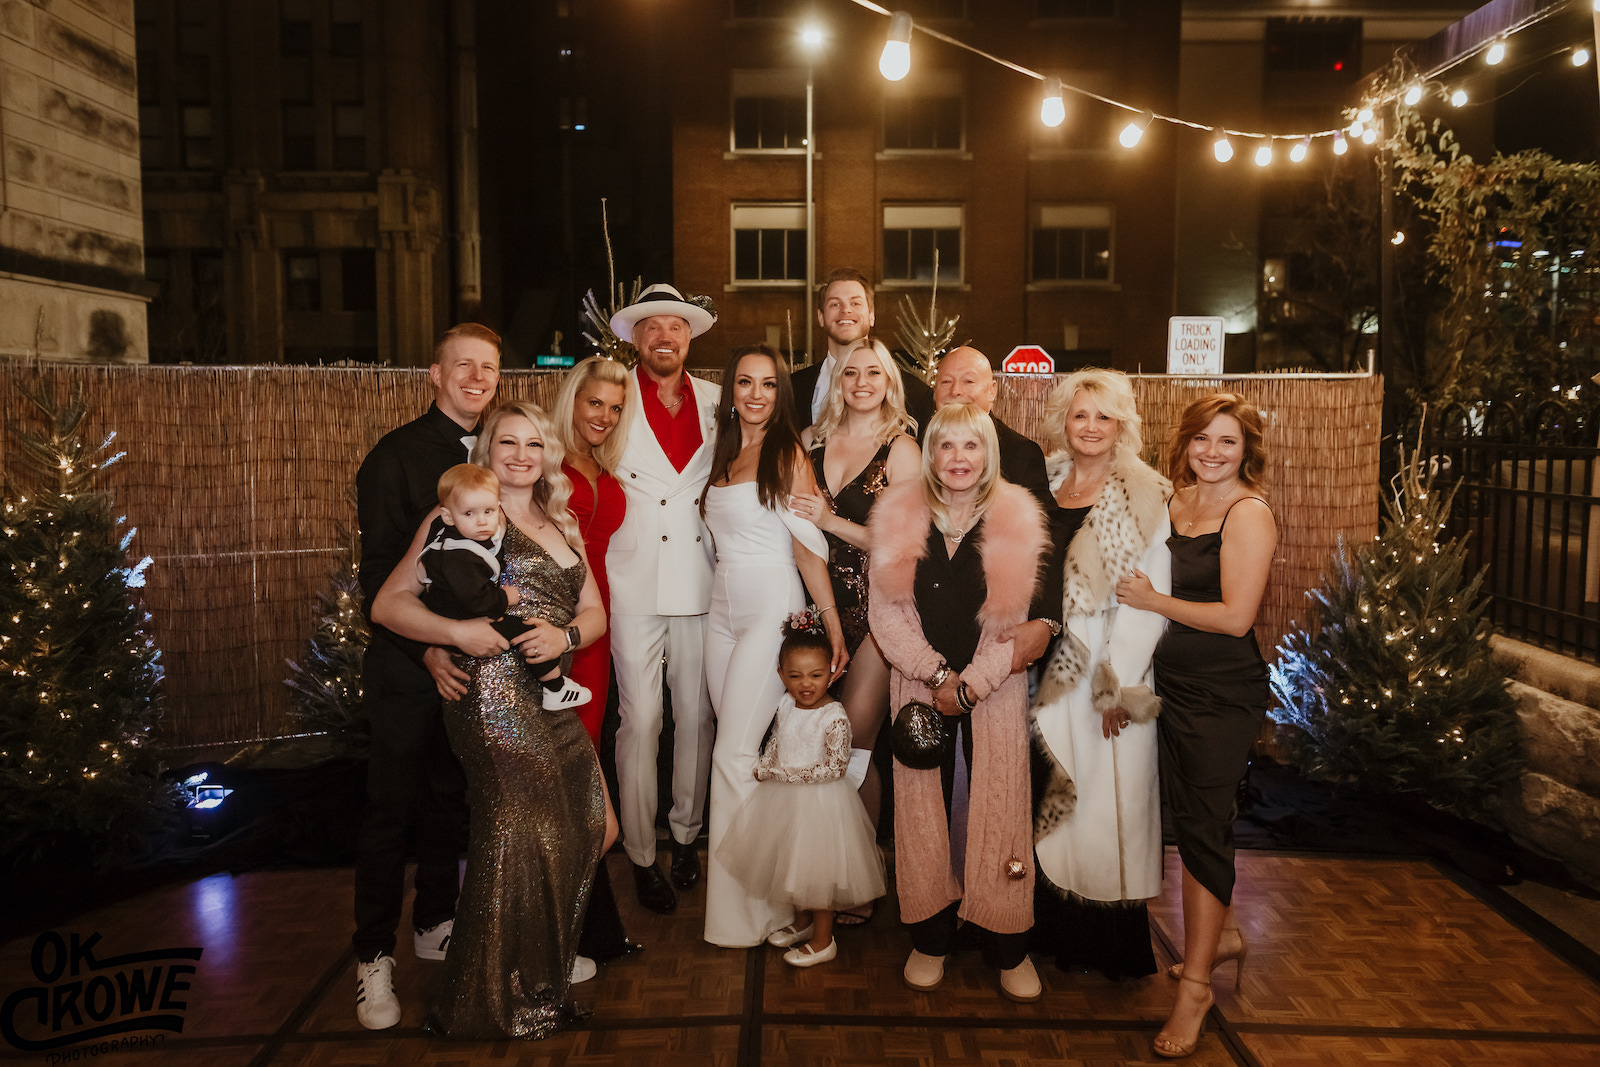 wedding guests at The Dwell Hotel in downtown Chattanooga, Tennessee